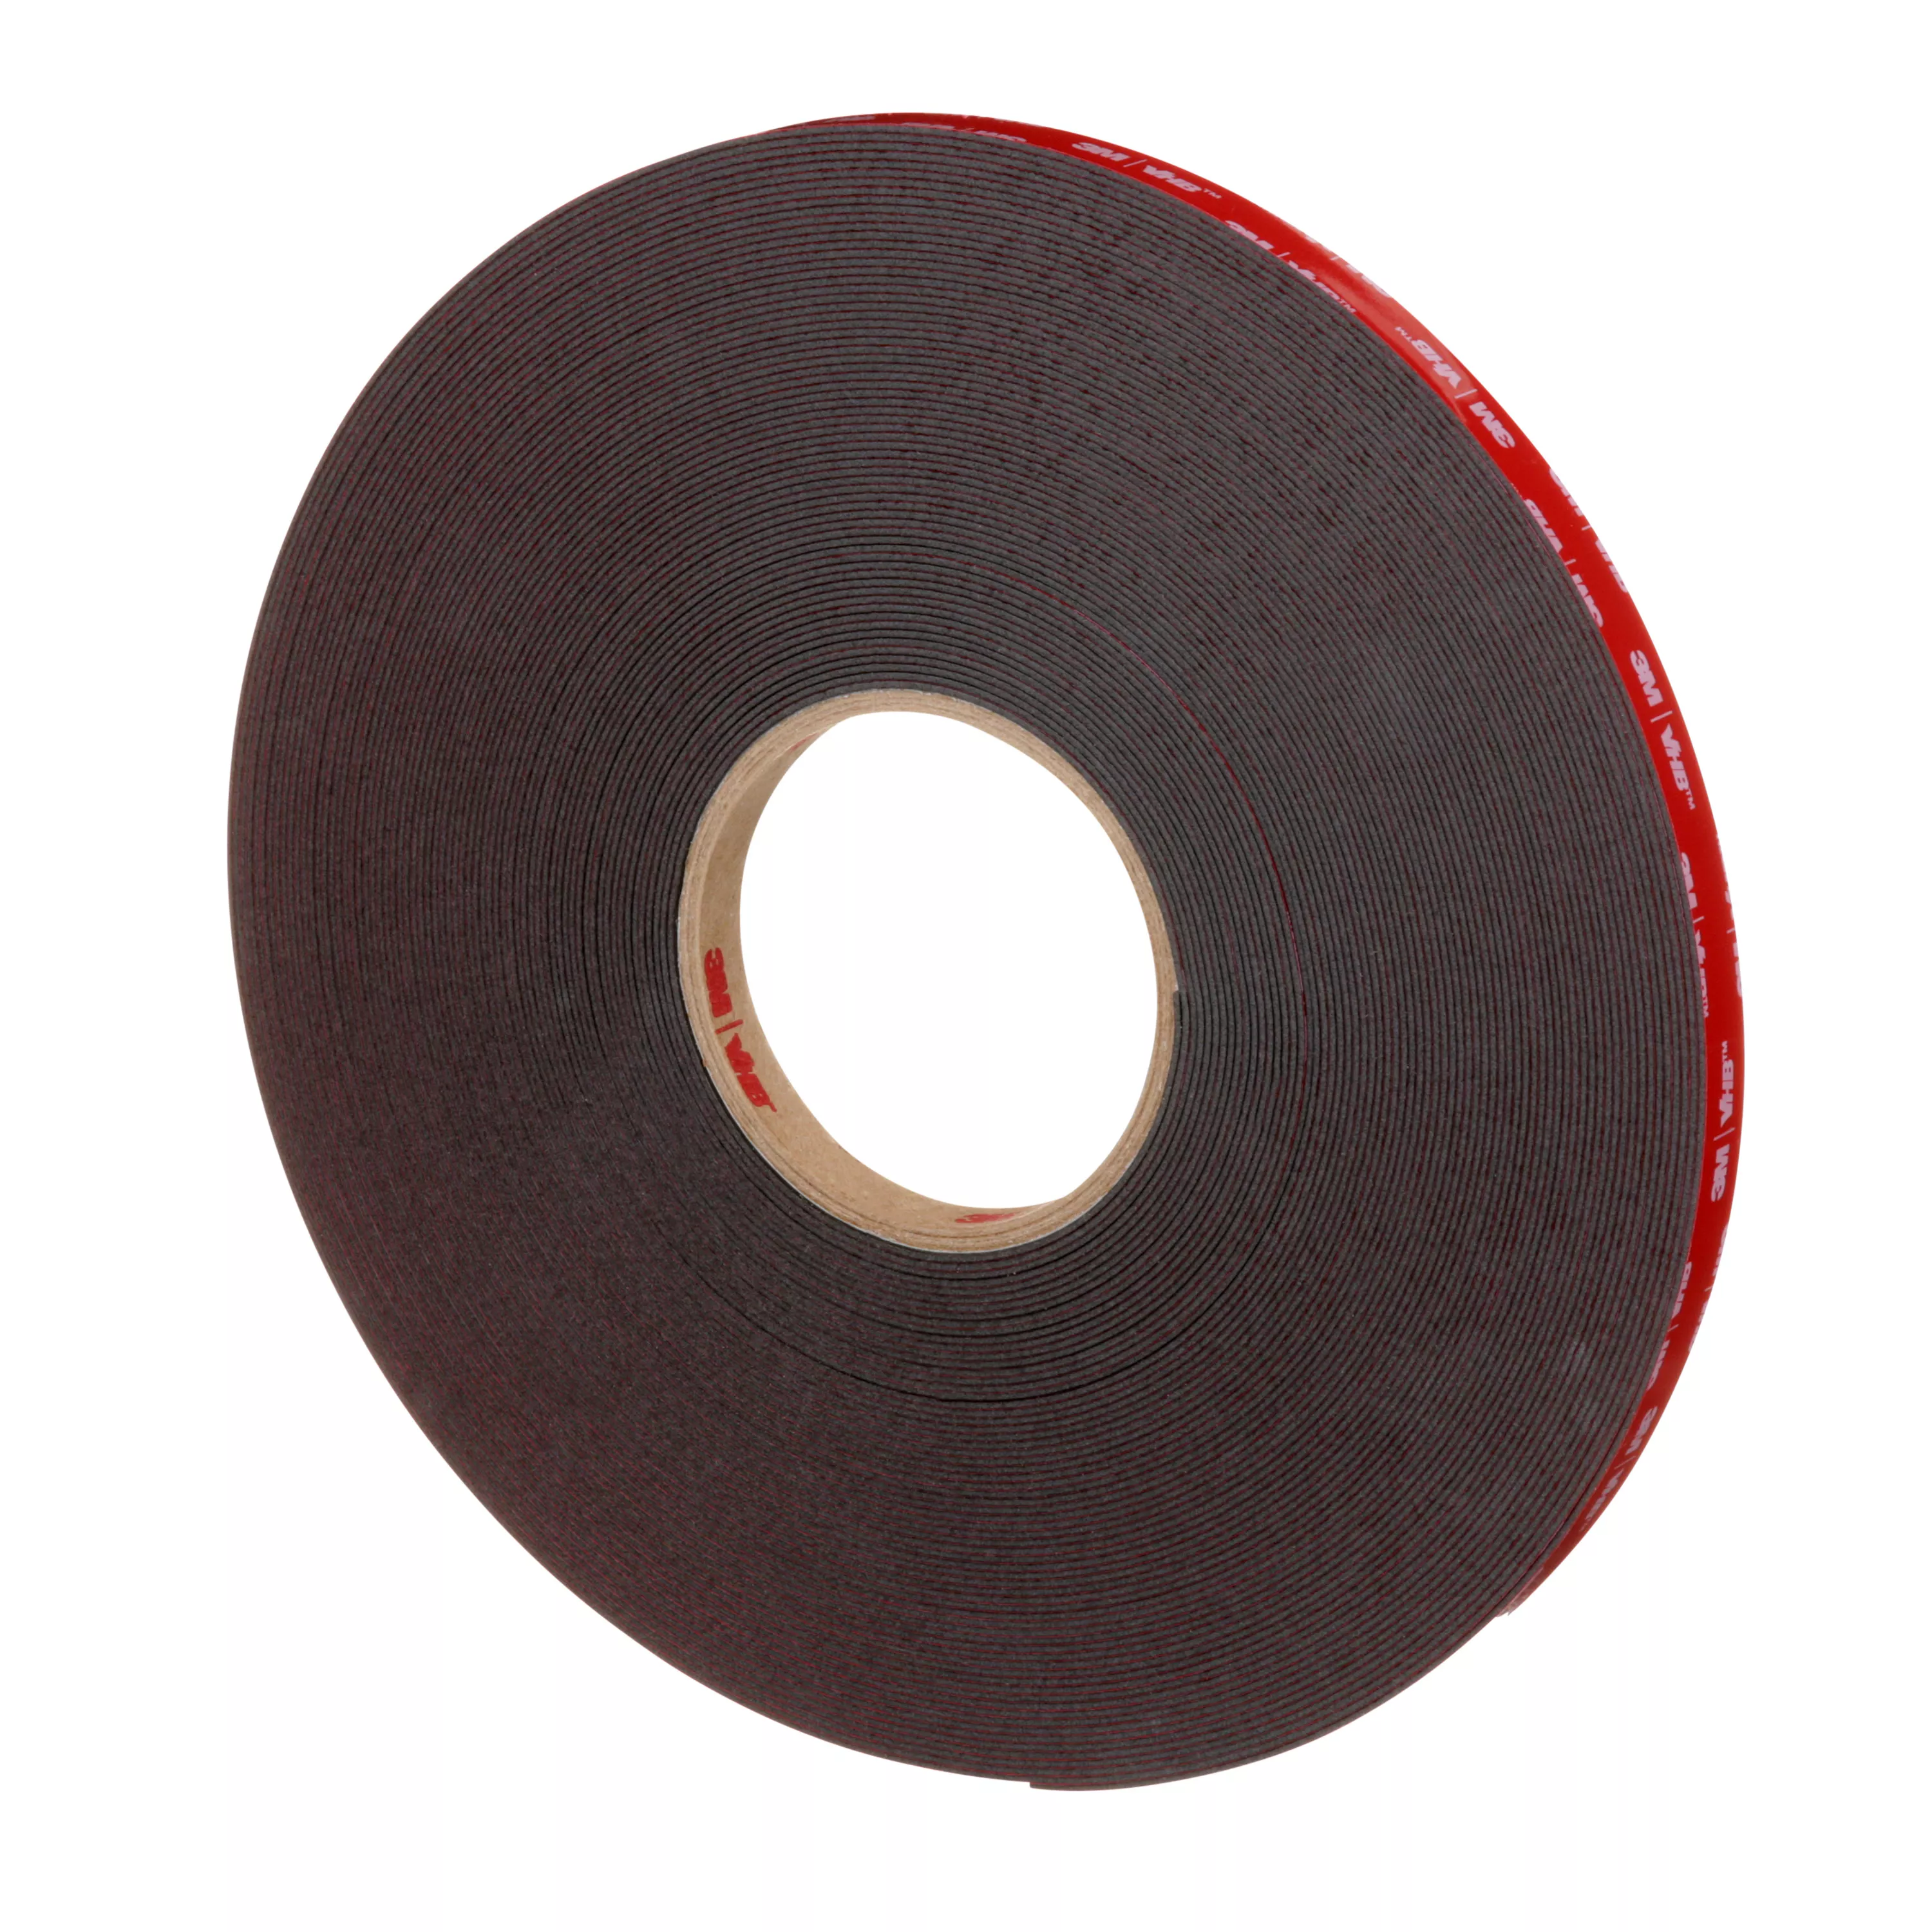 Product Number 5925 | 3M™ VHB™ Tape 5925